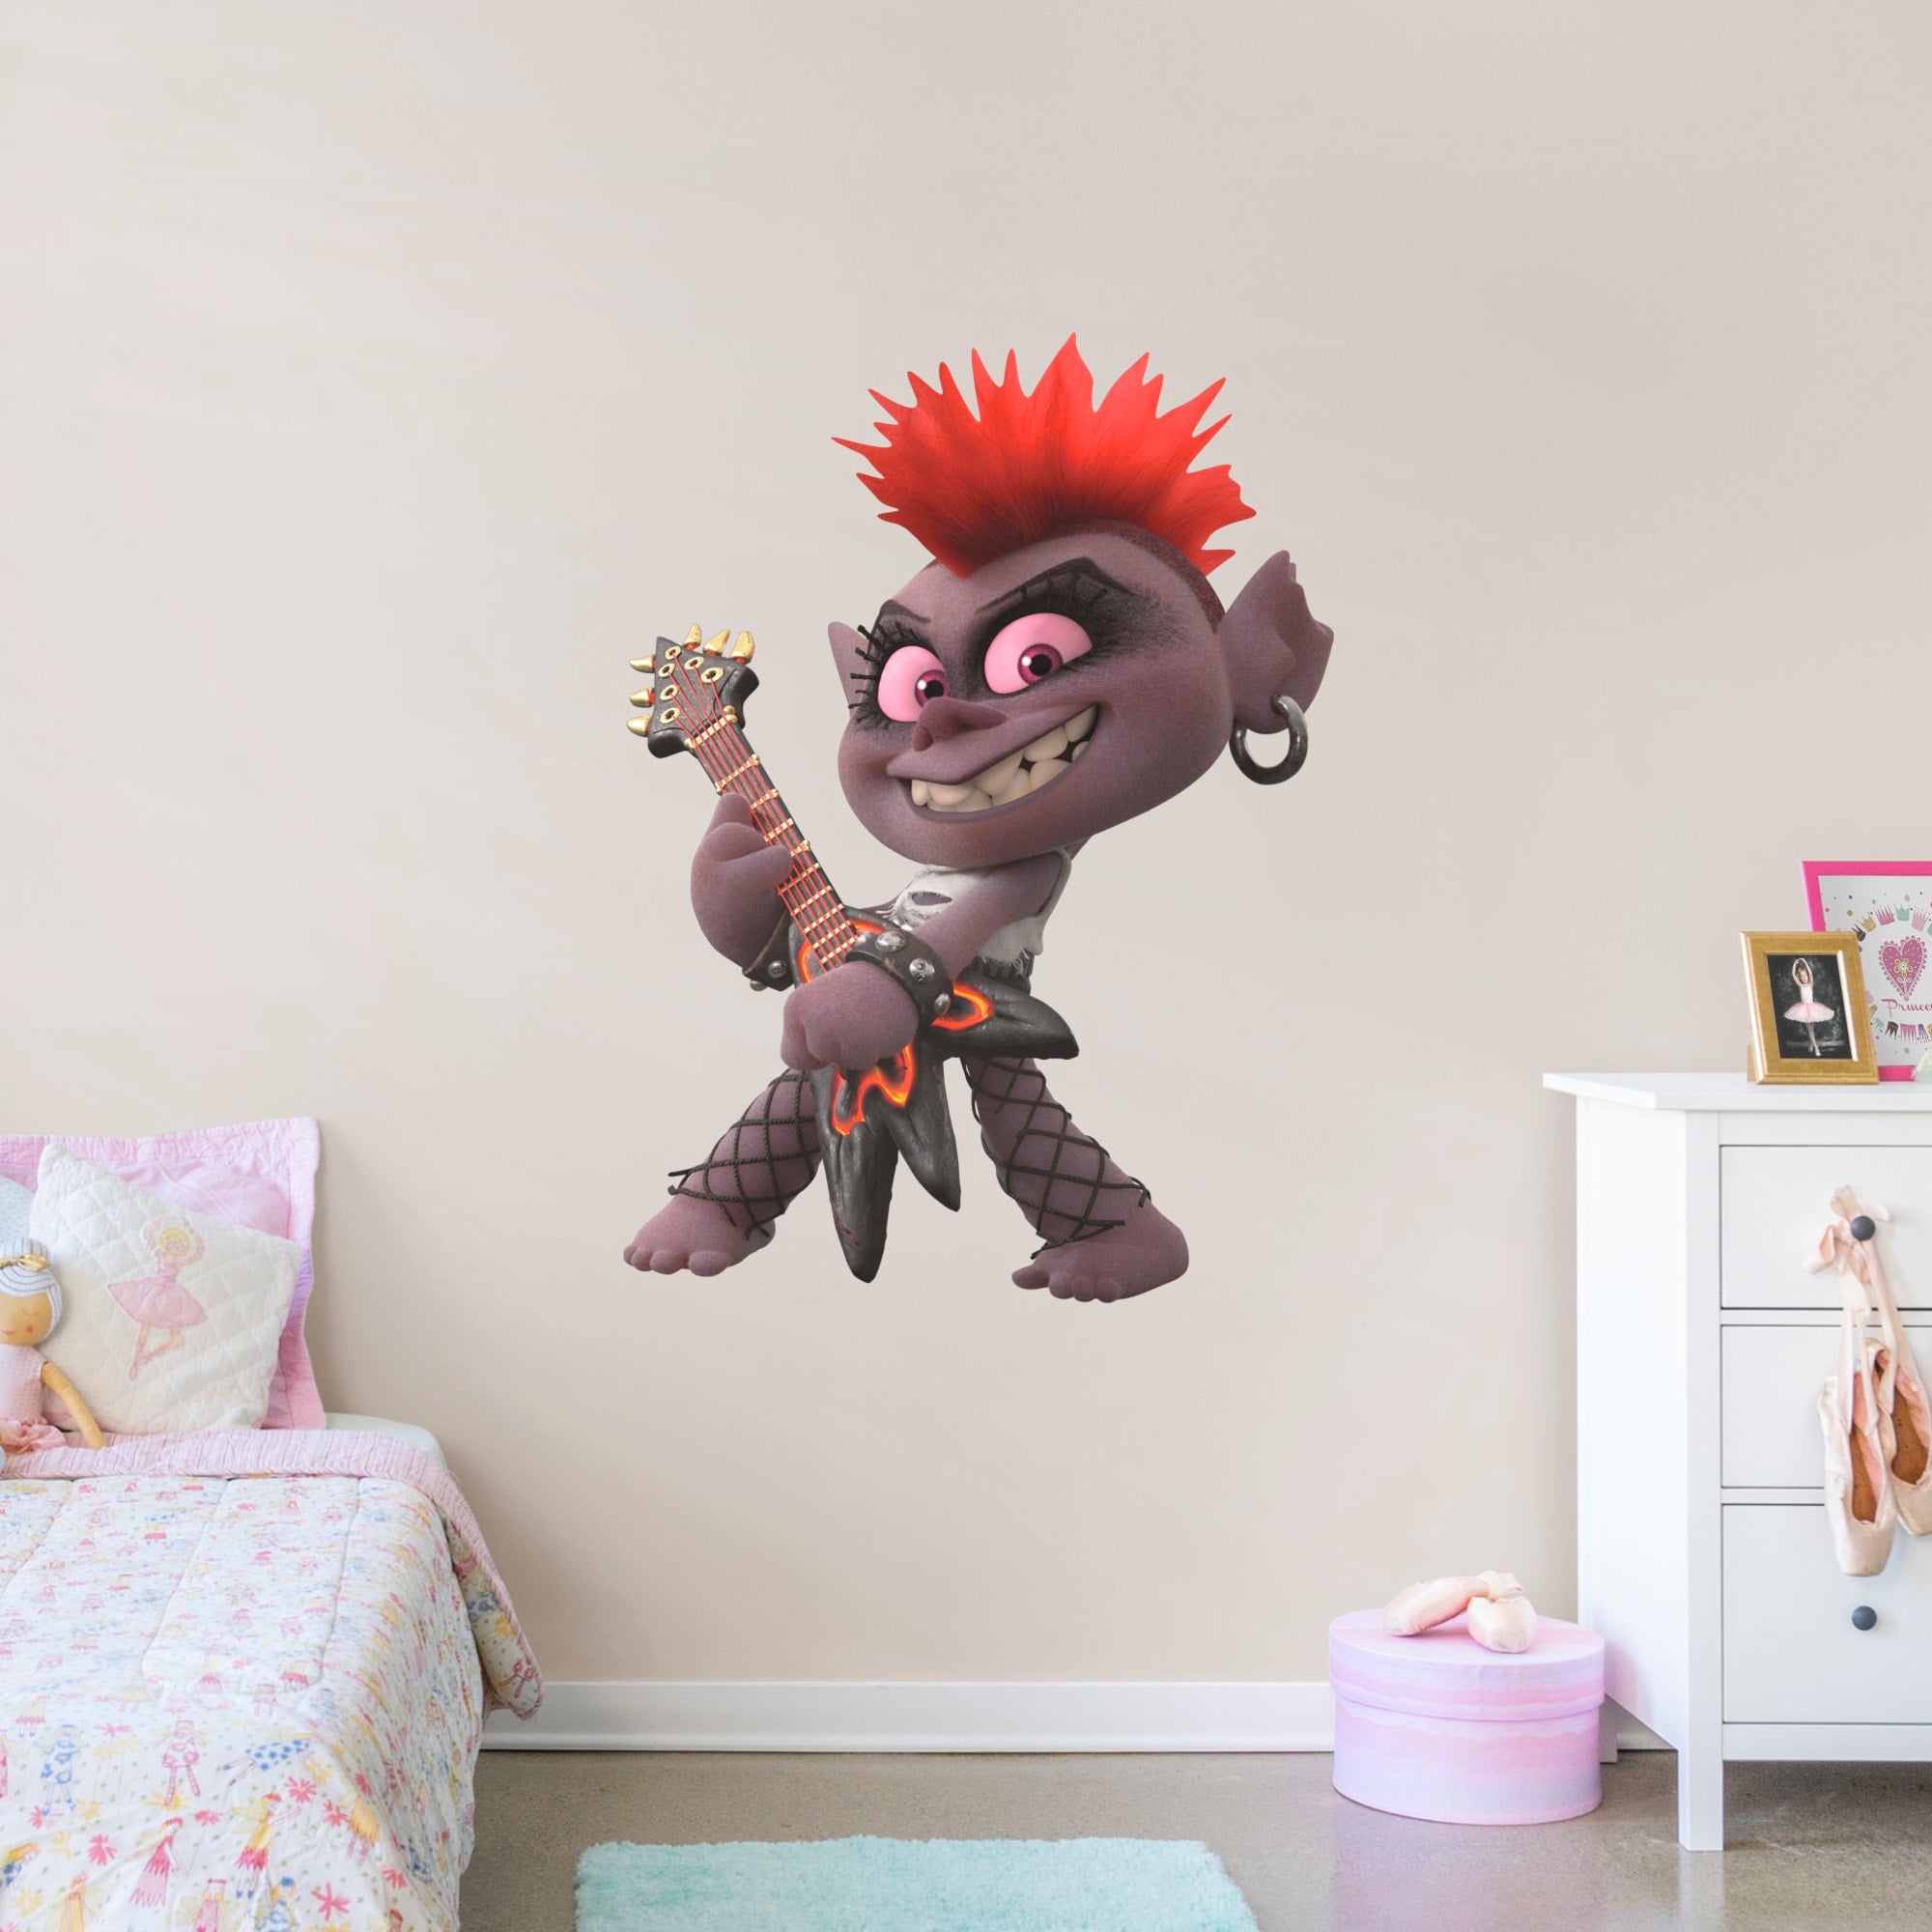 Queen Barb: Trolls World Tour - Officially Licensed Removable Wall Decal Giant Character + 2 Decals (33"W x 51"H) by Fathead | V